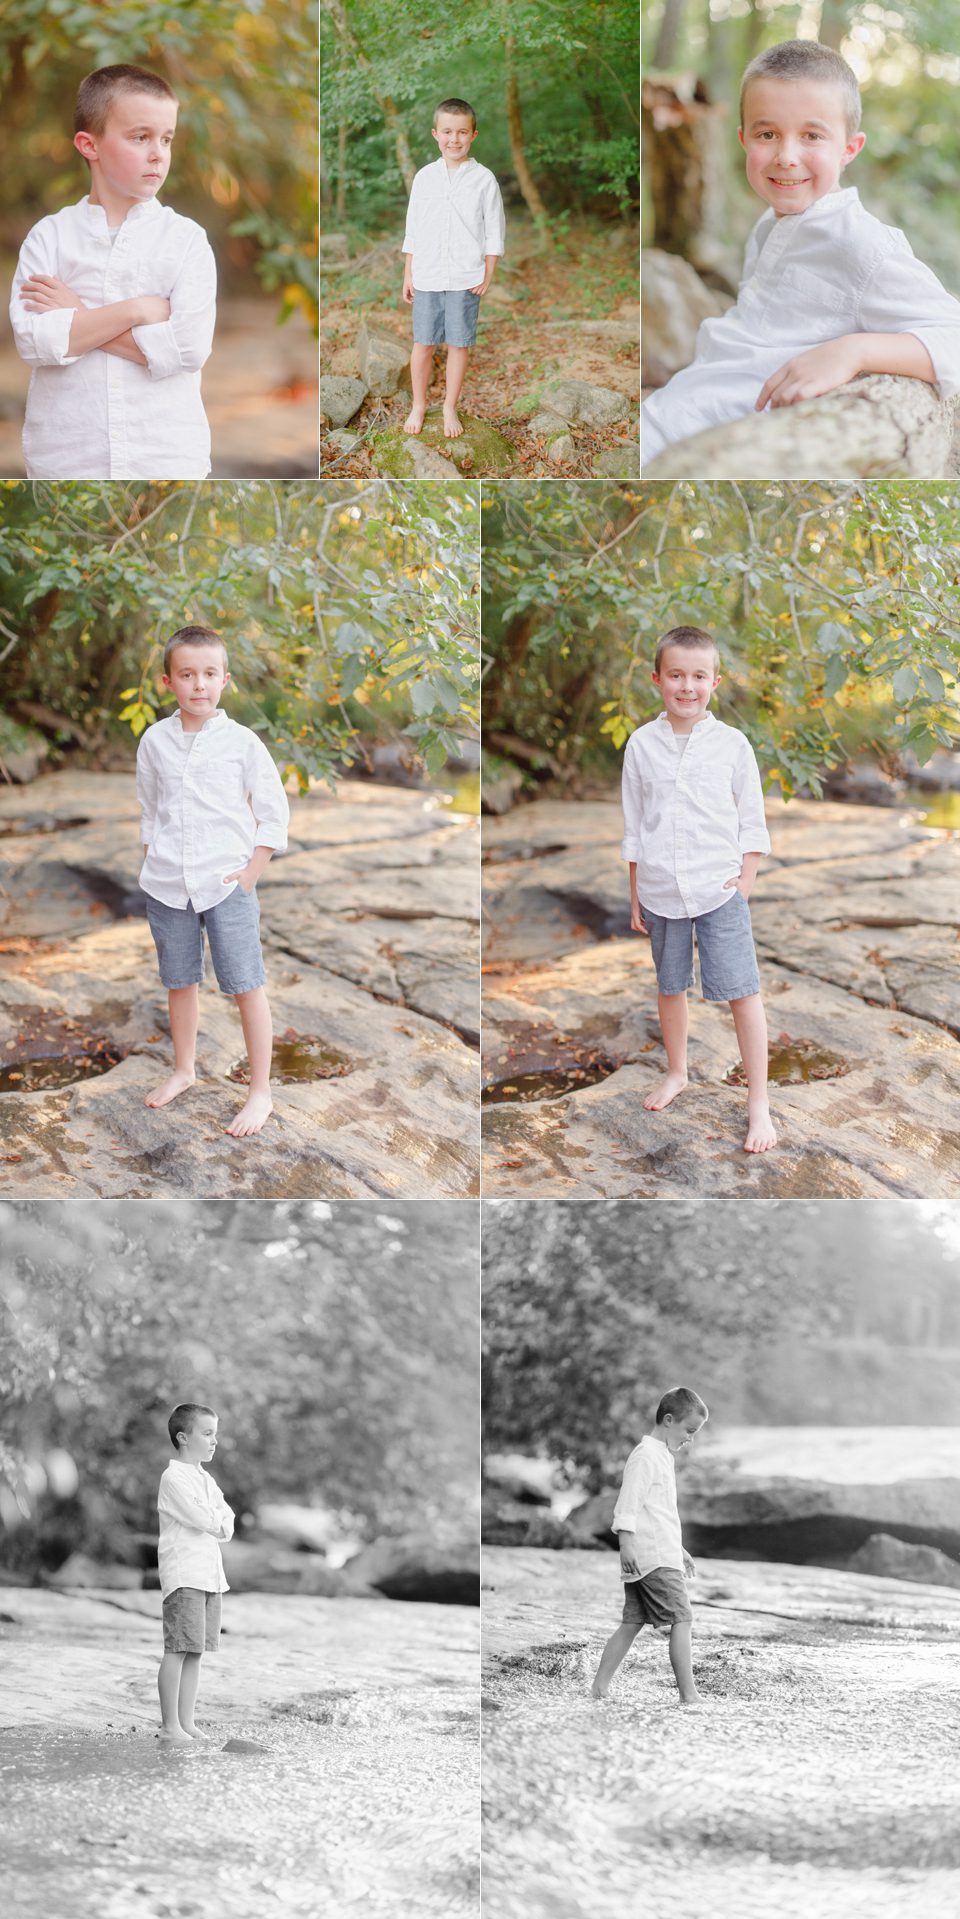 End of summer portraits of a 10 year old boy on the shoals taken by Athens, GA child photographer.